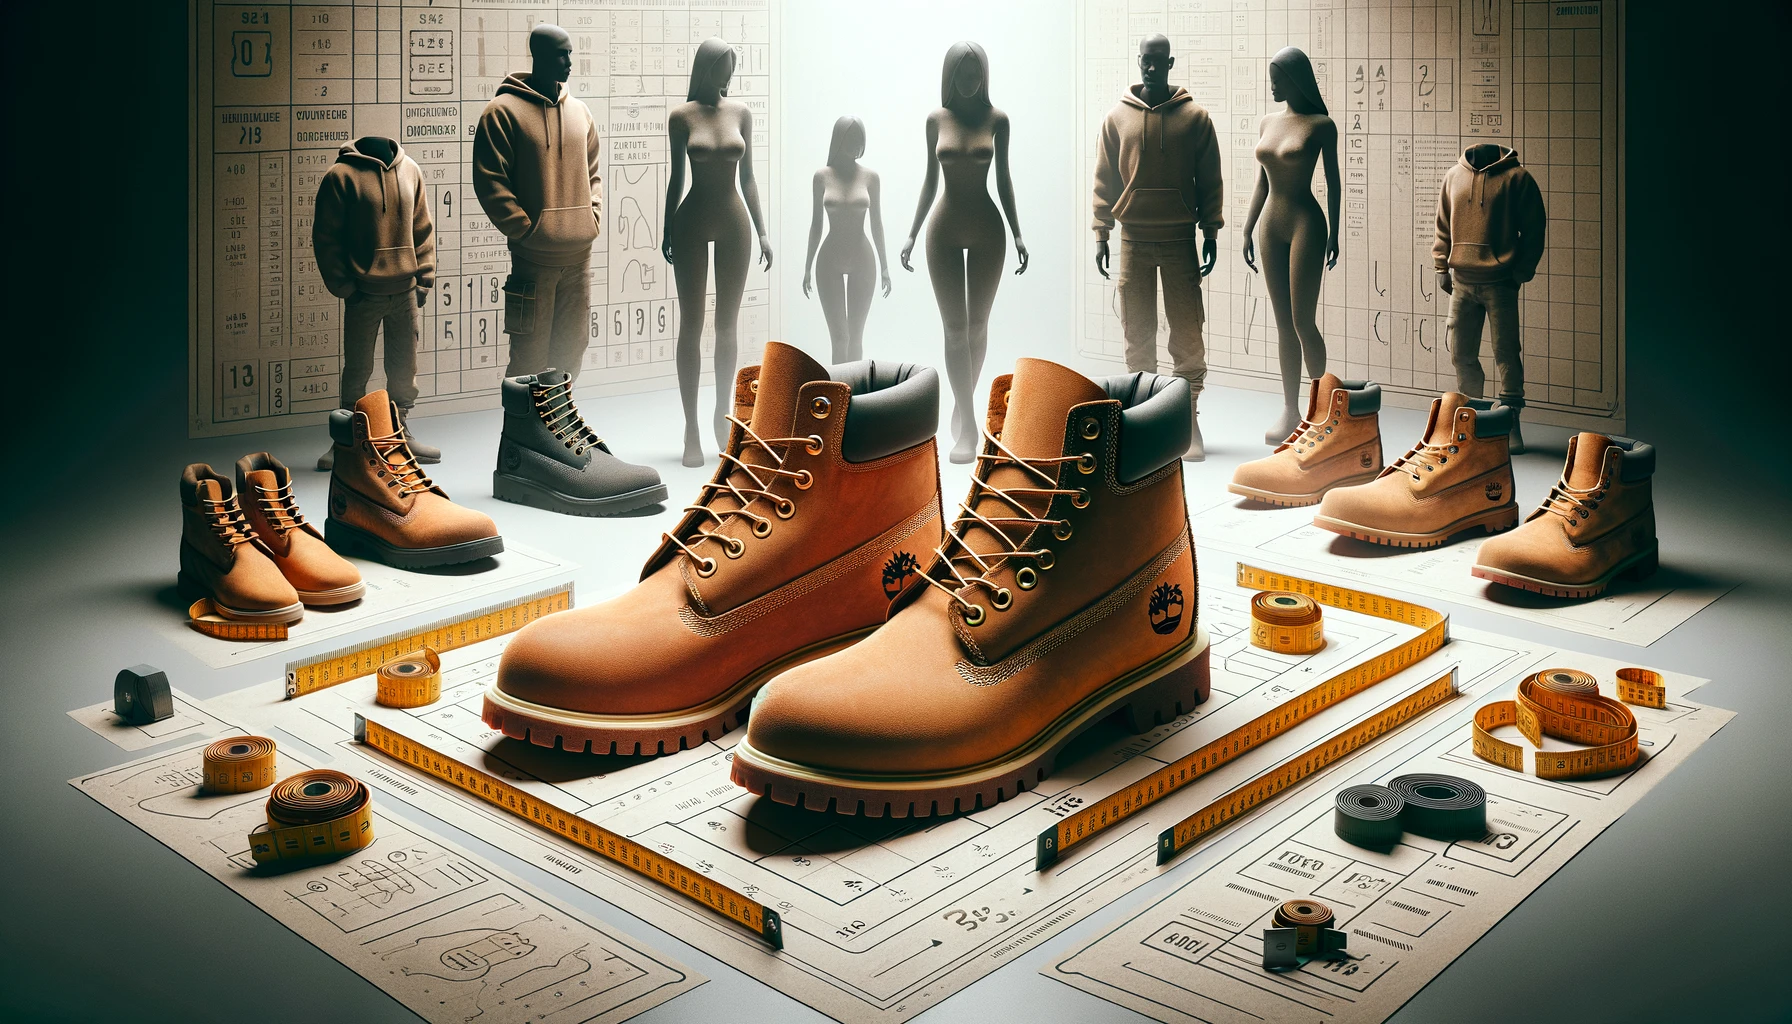 An image representing a size guide for Timberland boots, differentiated by gender. The scene displays a pair of men's Timberland boots and a pair of women's Timberland boots side by side, with a clear indication of their sizes. Around the boots, visual elements such as a measuring tape, size charts, or numerical indicators provide a comprehensive view of the size differences and options available for both genders. The composition is designed to be informative, with a focus on clarity and the iconic style of the boots. The background is minimalistic, ensuring that the attention is on the boots and the size information.